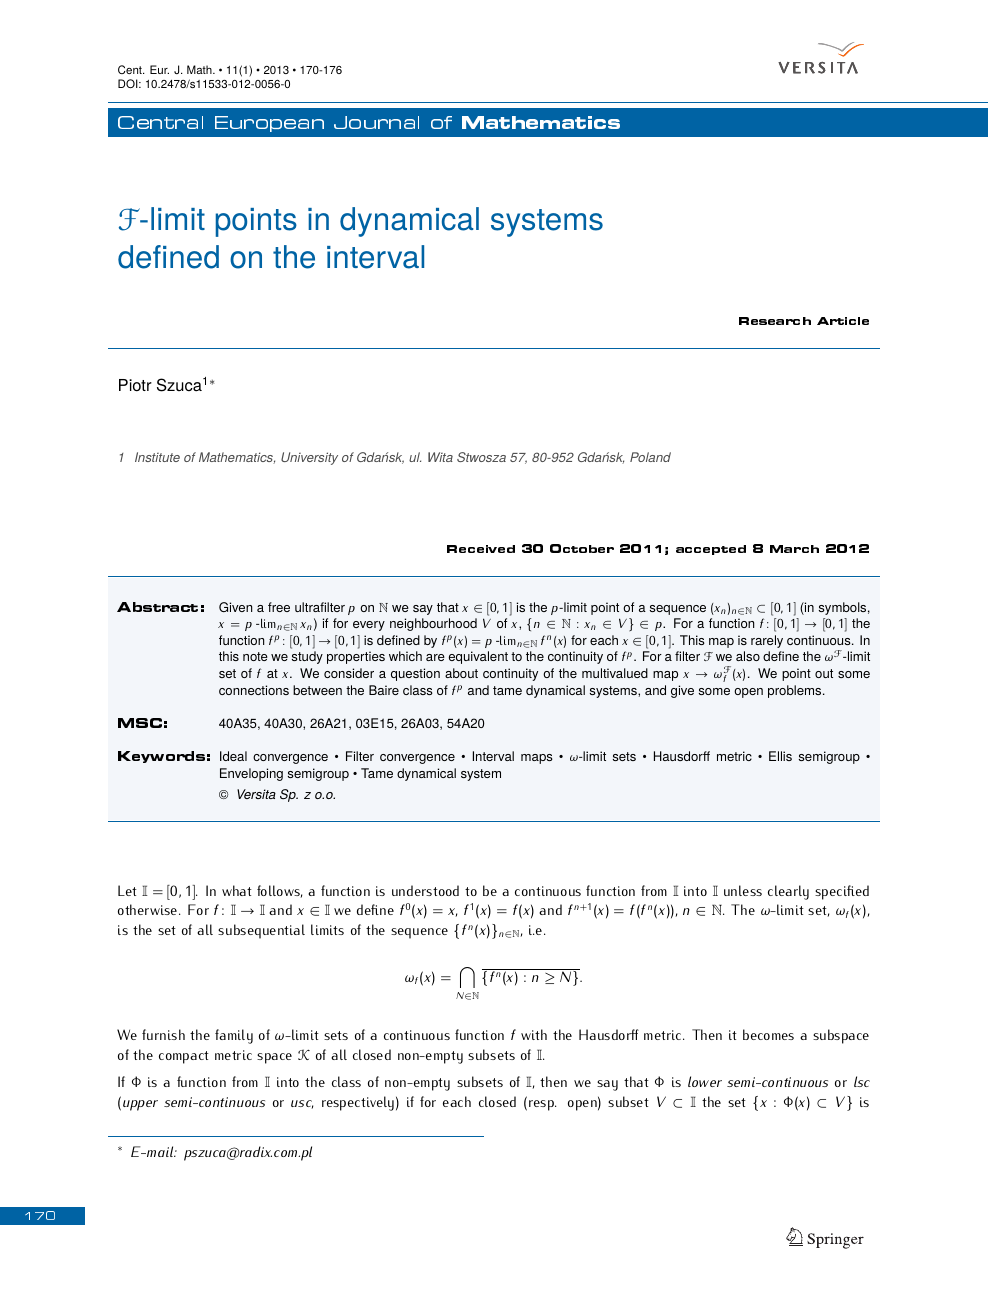 F Limit Points In Dynamical Systems Defined On The Interval Topic Of Research Paper In Mathematics Download Scholarly Article Pdf And Read For Free On Cyberleninka Open Science Hub